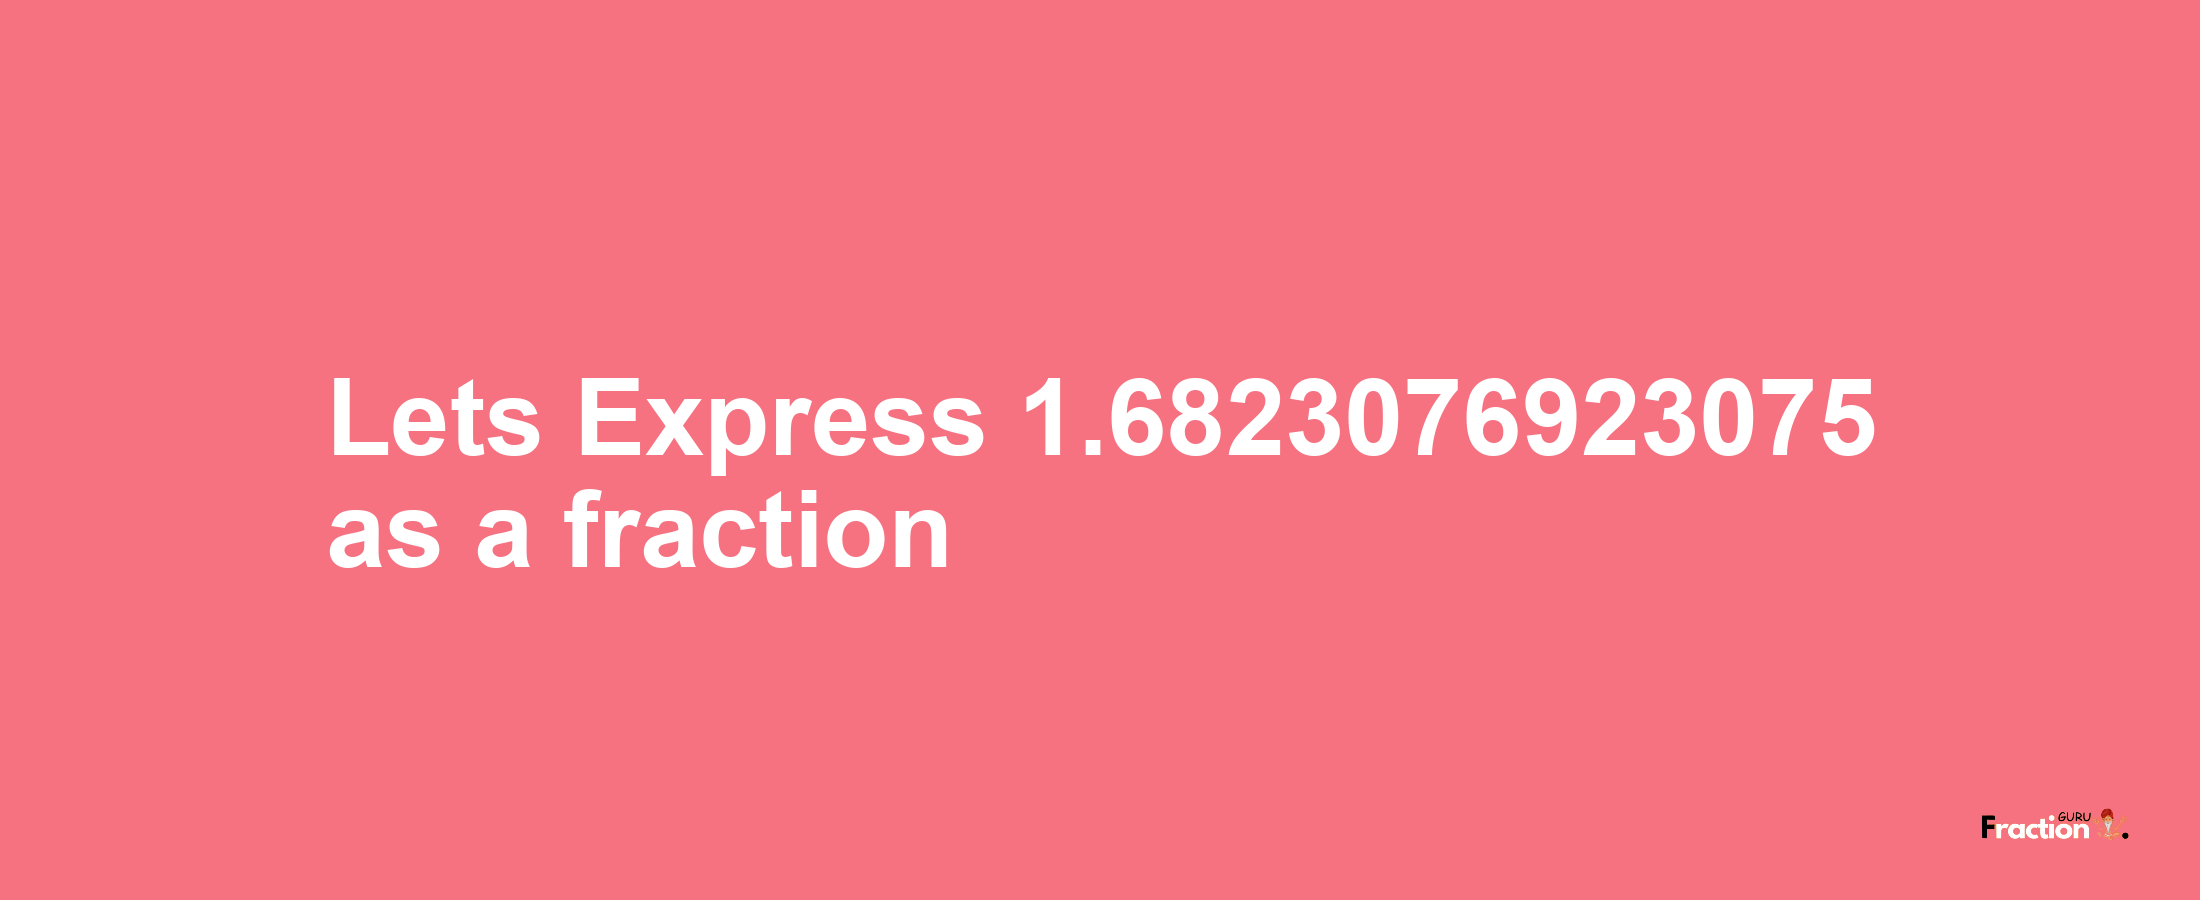 Lets Express 1.6823076923075 as afraction